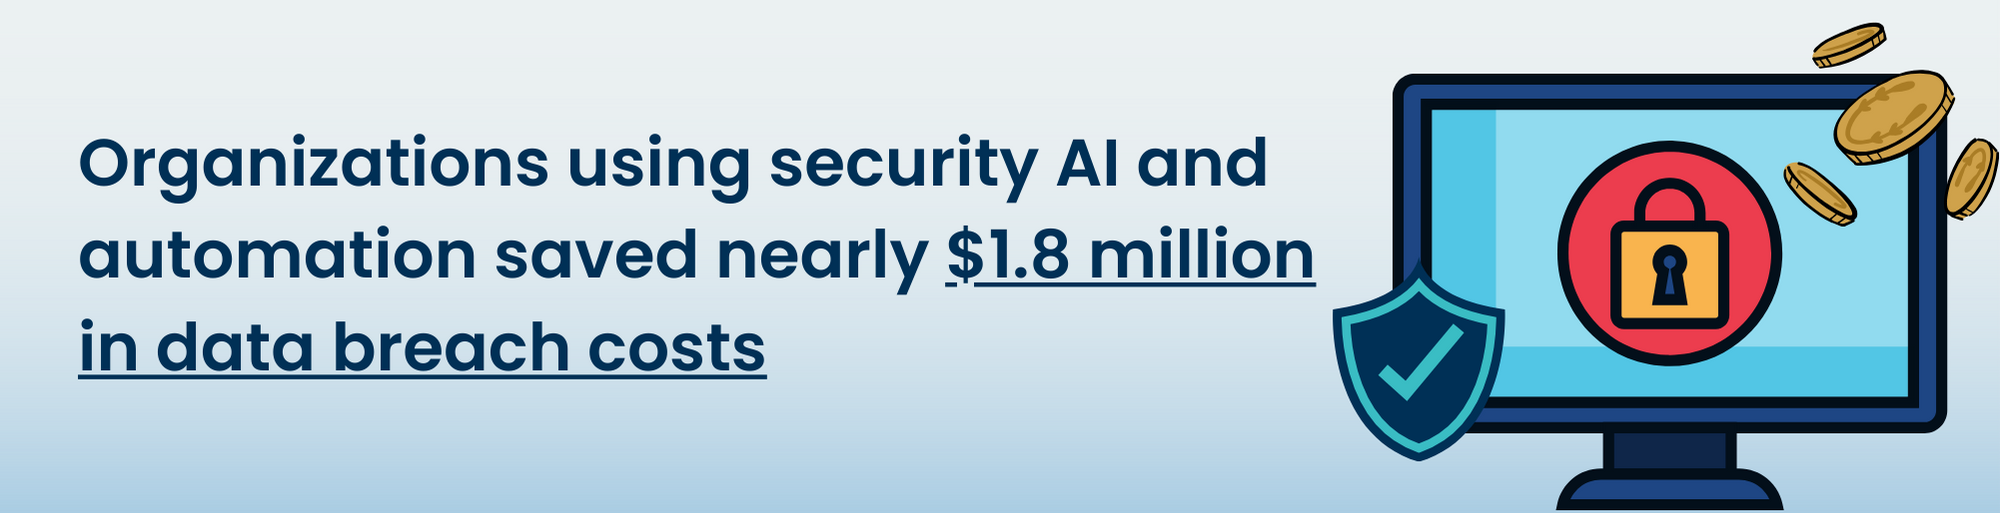 banner - organizations using security AI and automation saved nearly 1.8 million in data breach costs